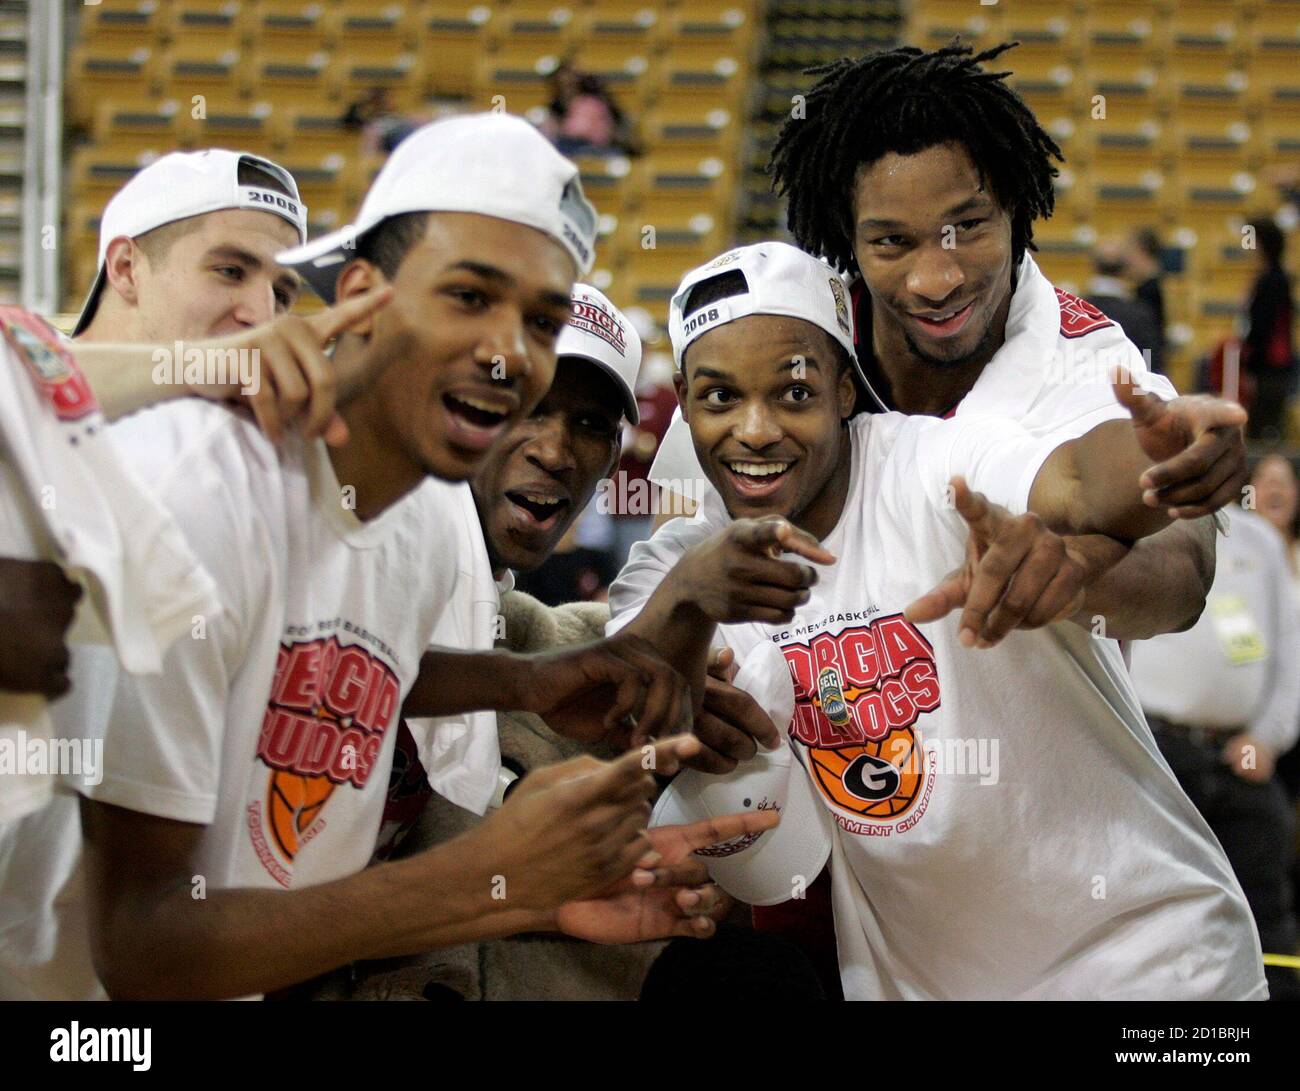 University of Georgia's players celebrate after their win over Arkansas for the Southeastern Conference title at their NCAA basketball game in Atlanta, Georgia March 16, 2008. REUTERS/Tami Chappell (UNITED STATES) Stock Photo